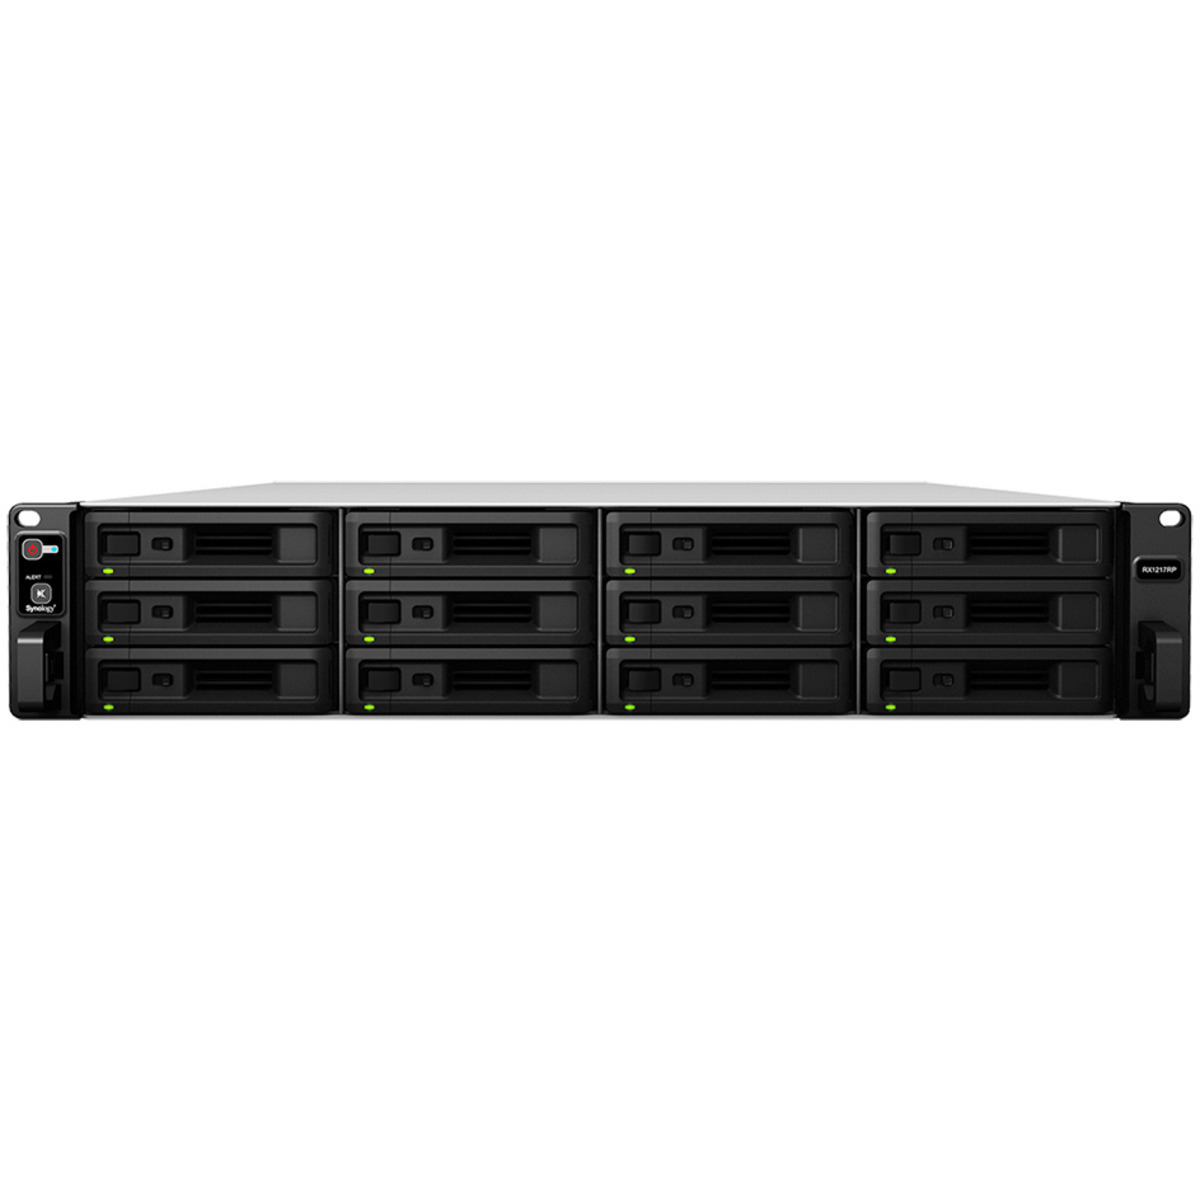 buy $4752 Synology RX1217 24tb RackMount Expansion Enclosure 12x2000gb Western Digital Red SA500 WDS200T1R0A 2.5 SATA 6Gb/s SSD NAS Class Drives Installed - Burn-In Tested - nas headquarters buy network attached storage server device das new raid-5 free shipping usa RX1217